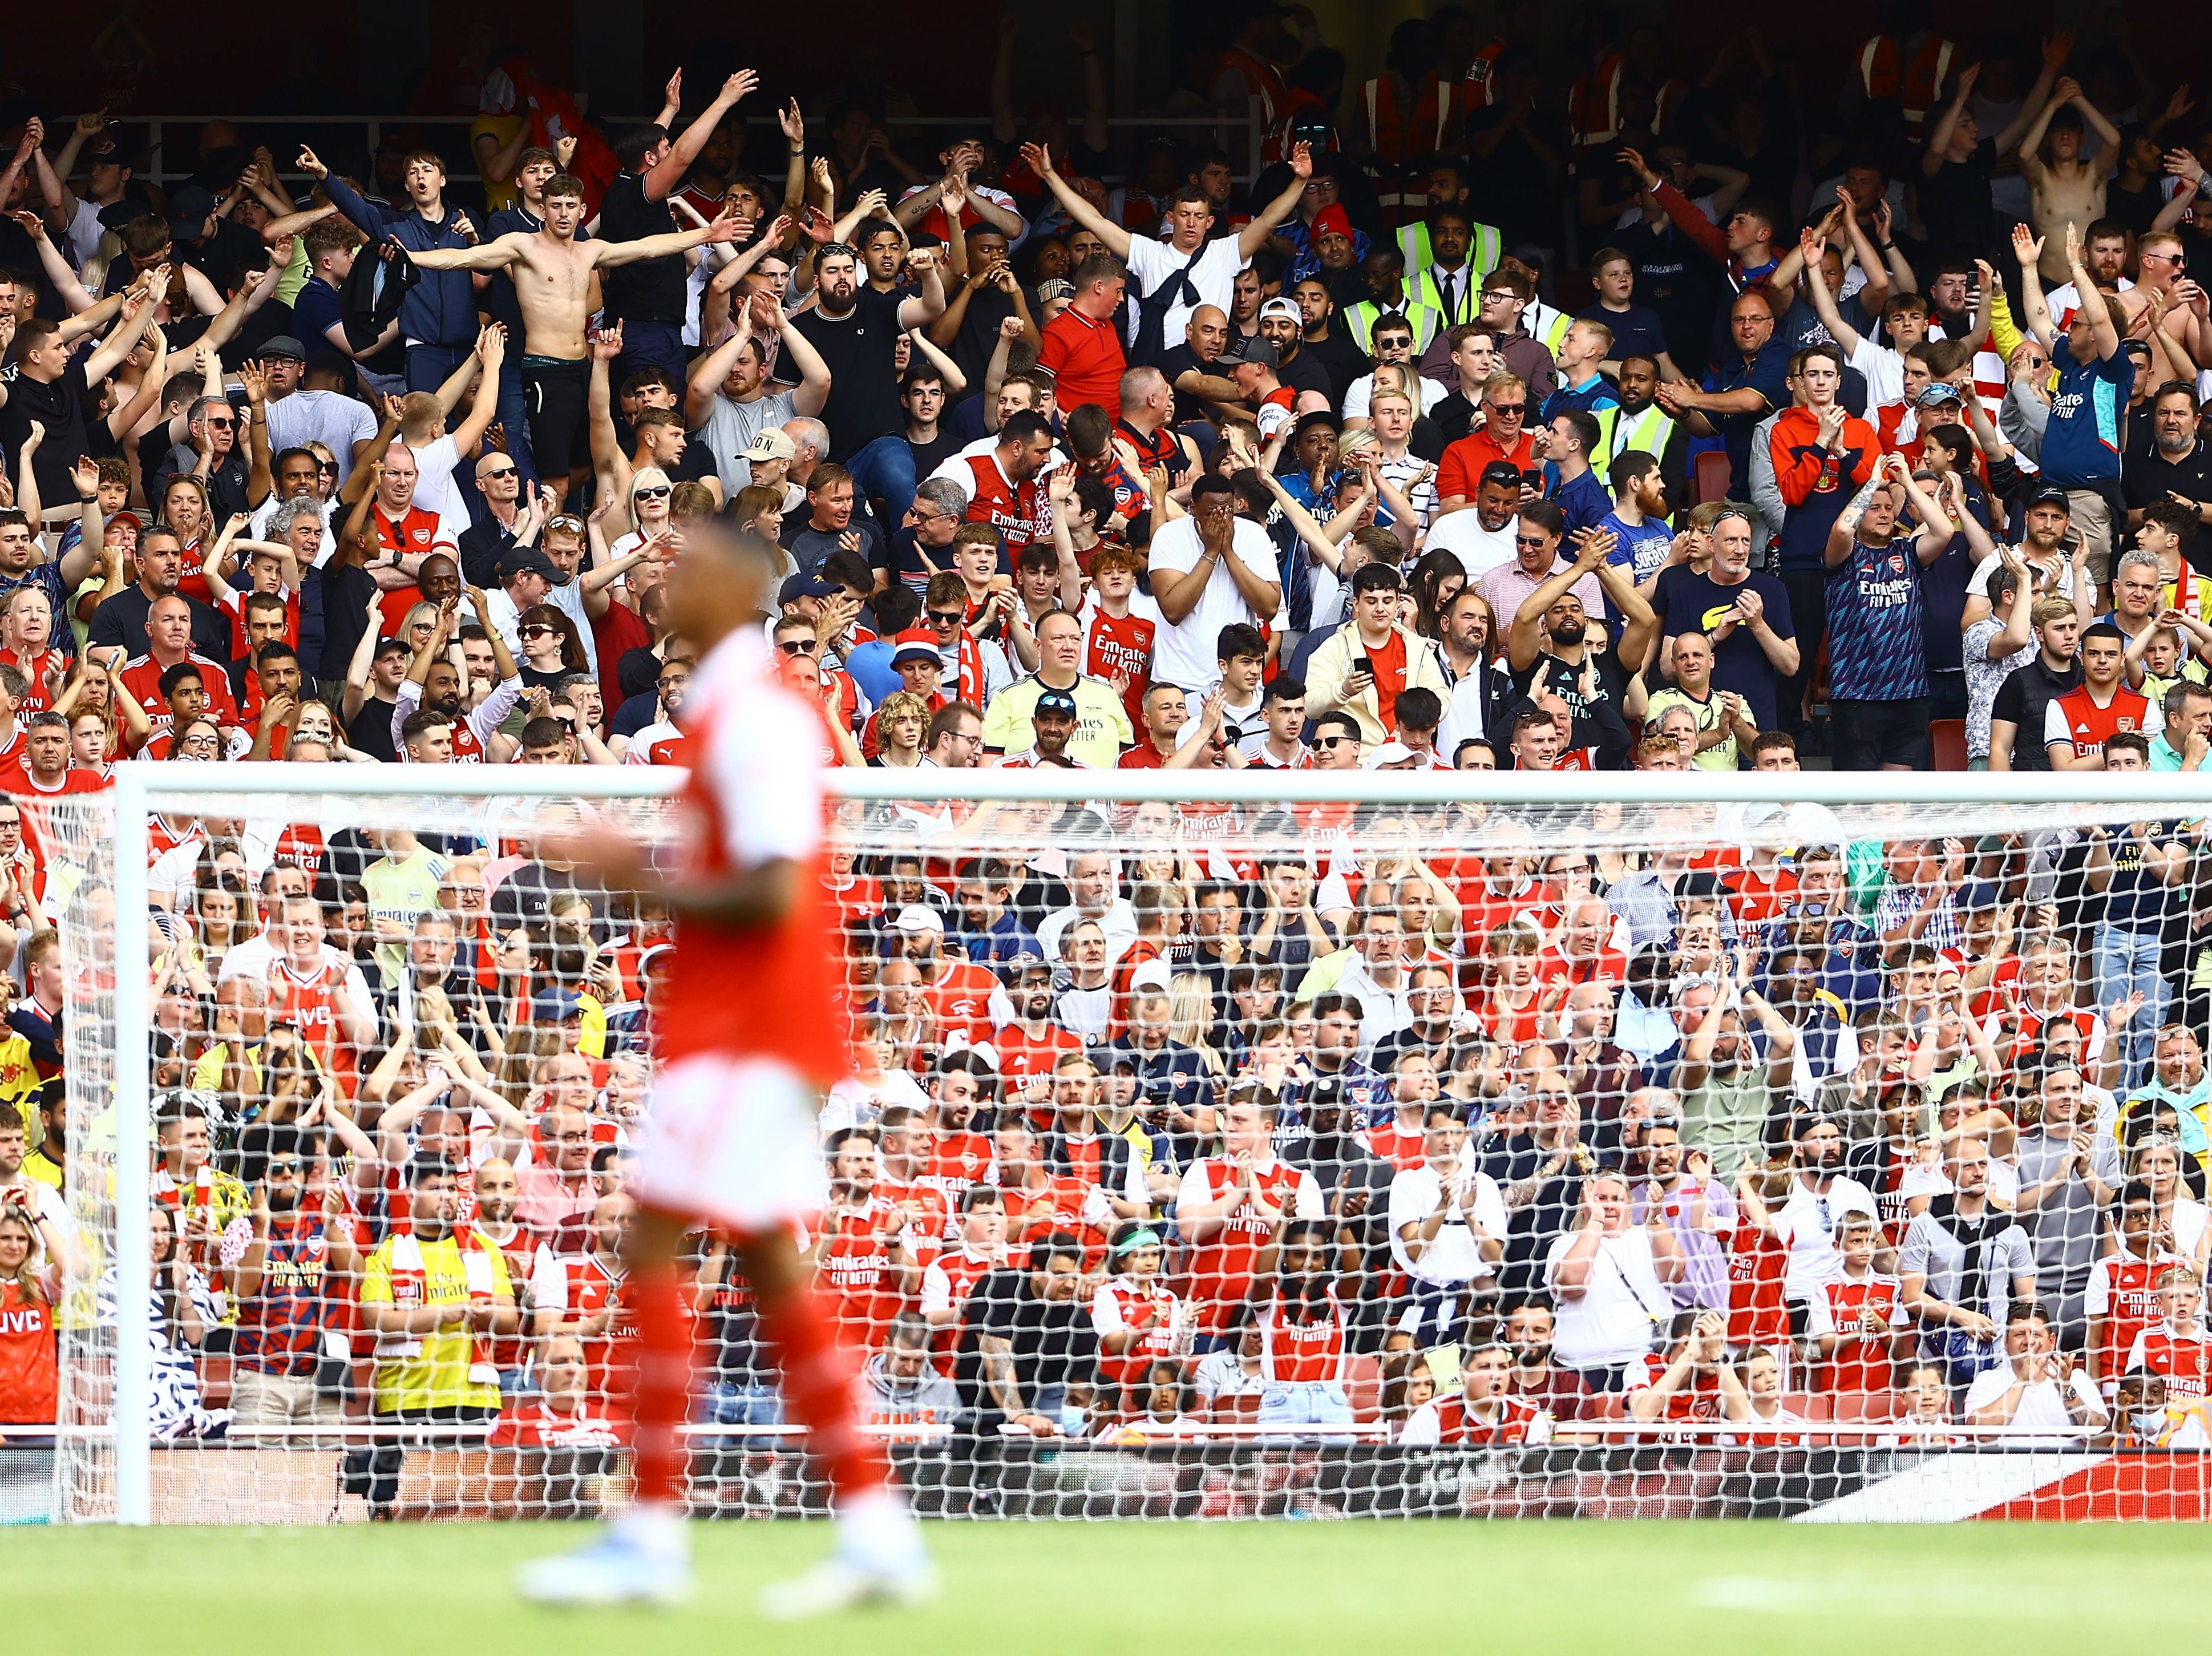 Arsenal fans celebrate at Arsenal v Everton in May 2022